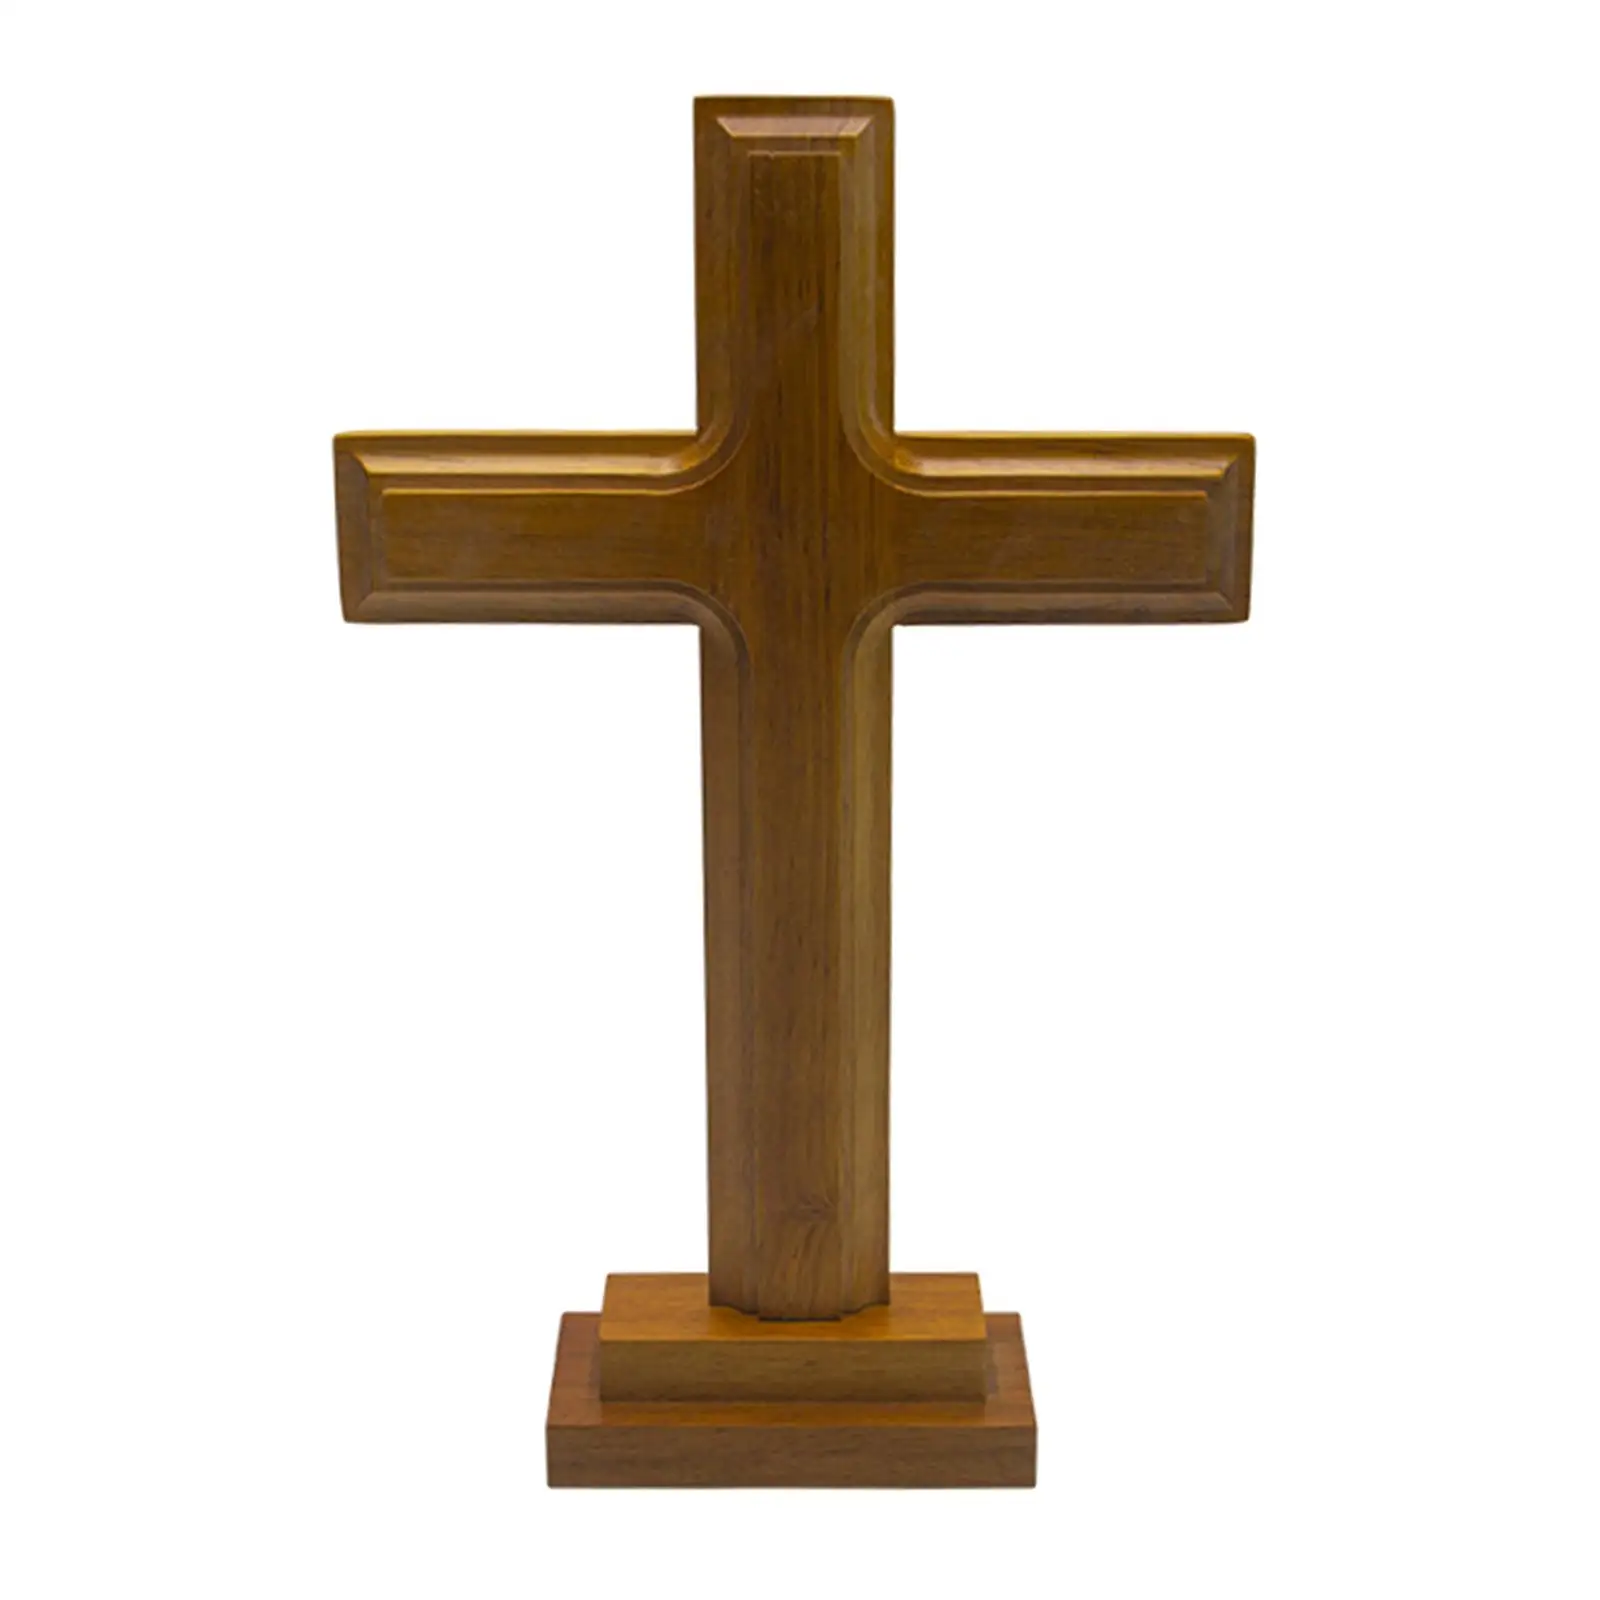 Wood Standing TableSided Display Crucifix Home Altar Shrine